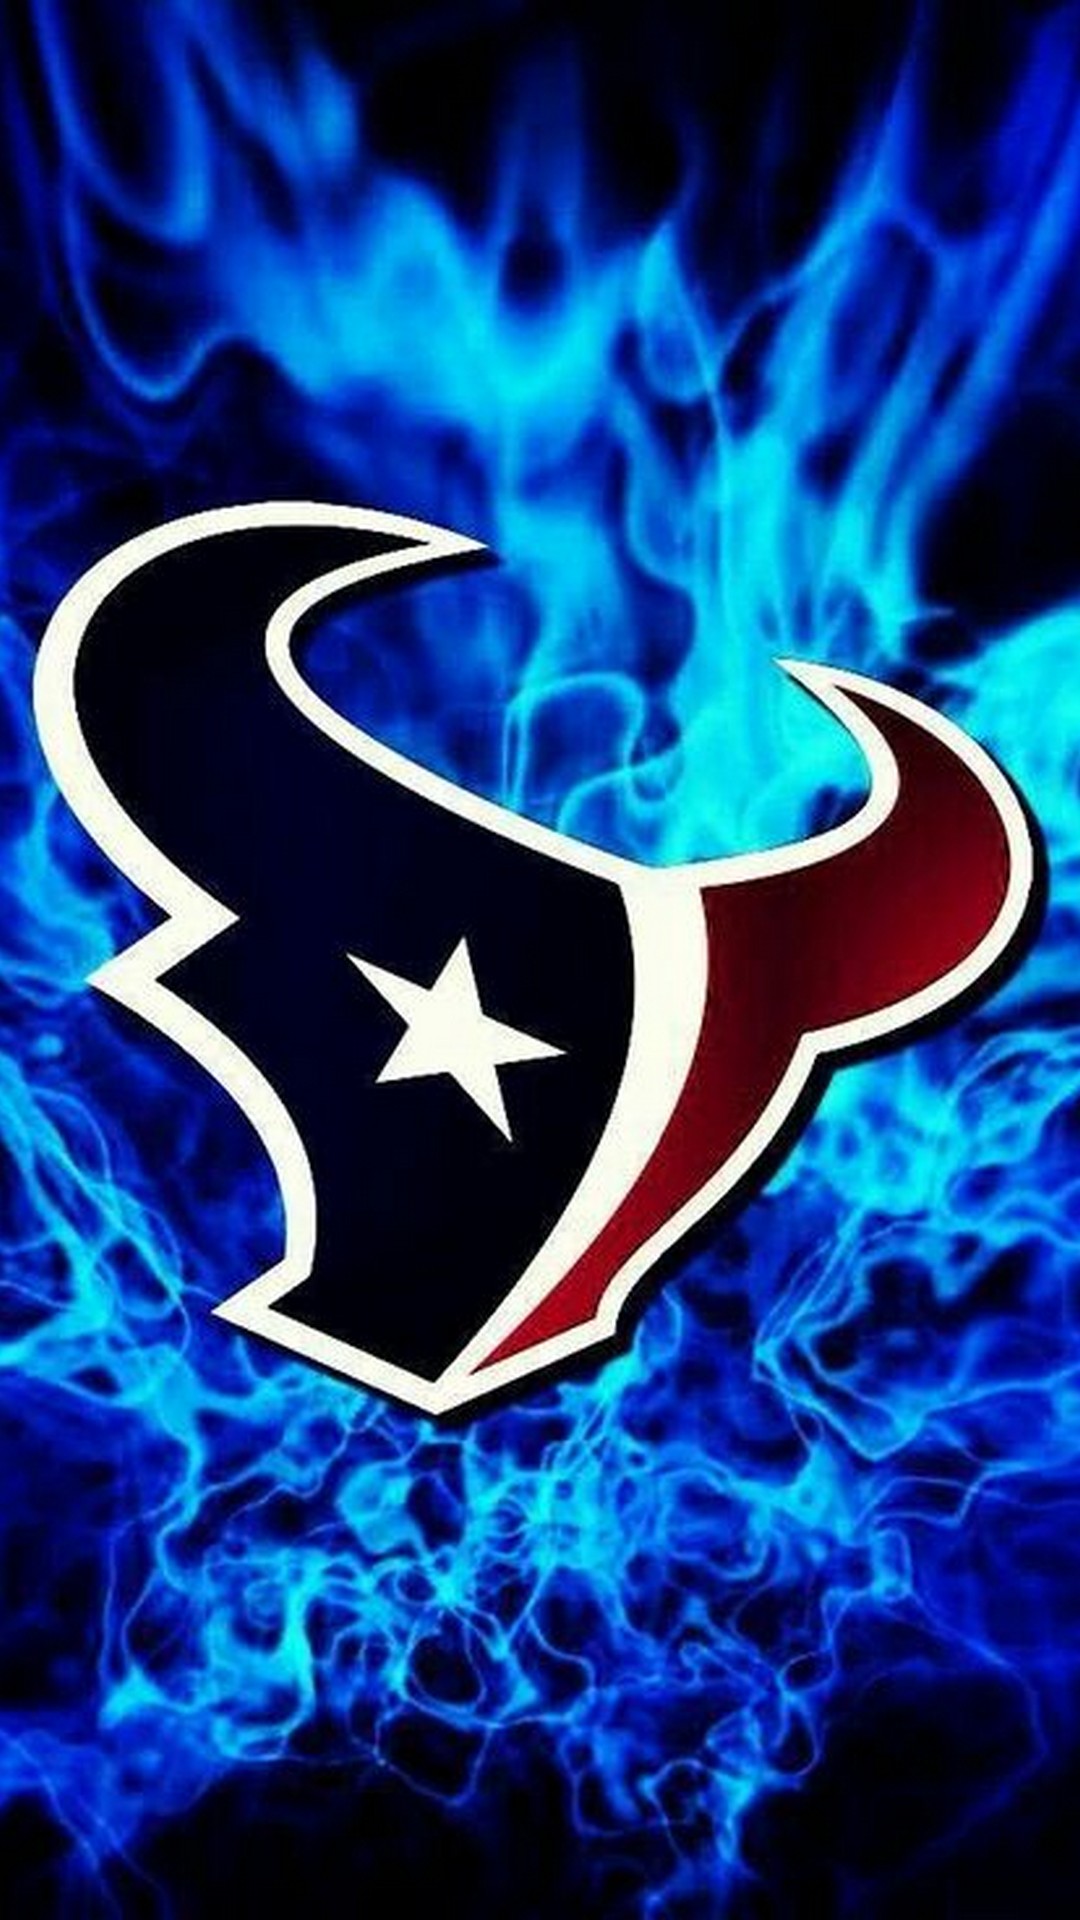 Houston Texans iPhone 6 Wallpaper with high-resolution 1080x1920 pixel. Download and set as wallpaper for Apple iPhone X, XS Max, XR, 8, 7, 6, SE, iPad, Android